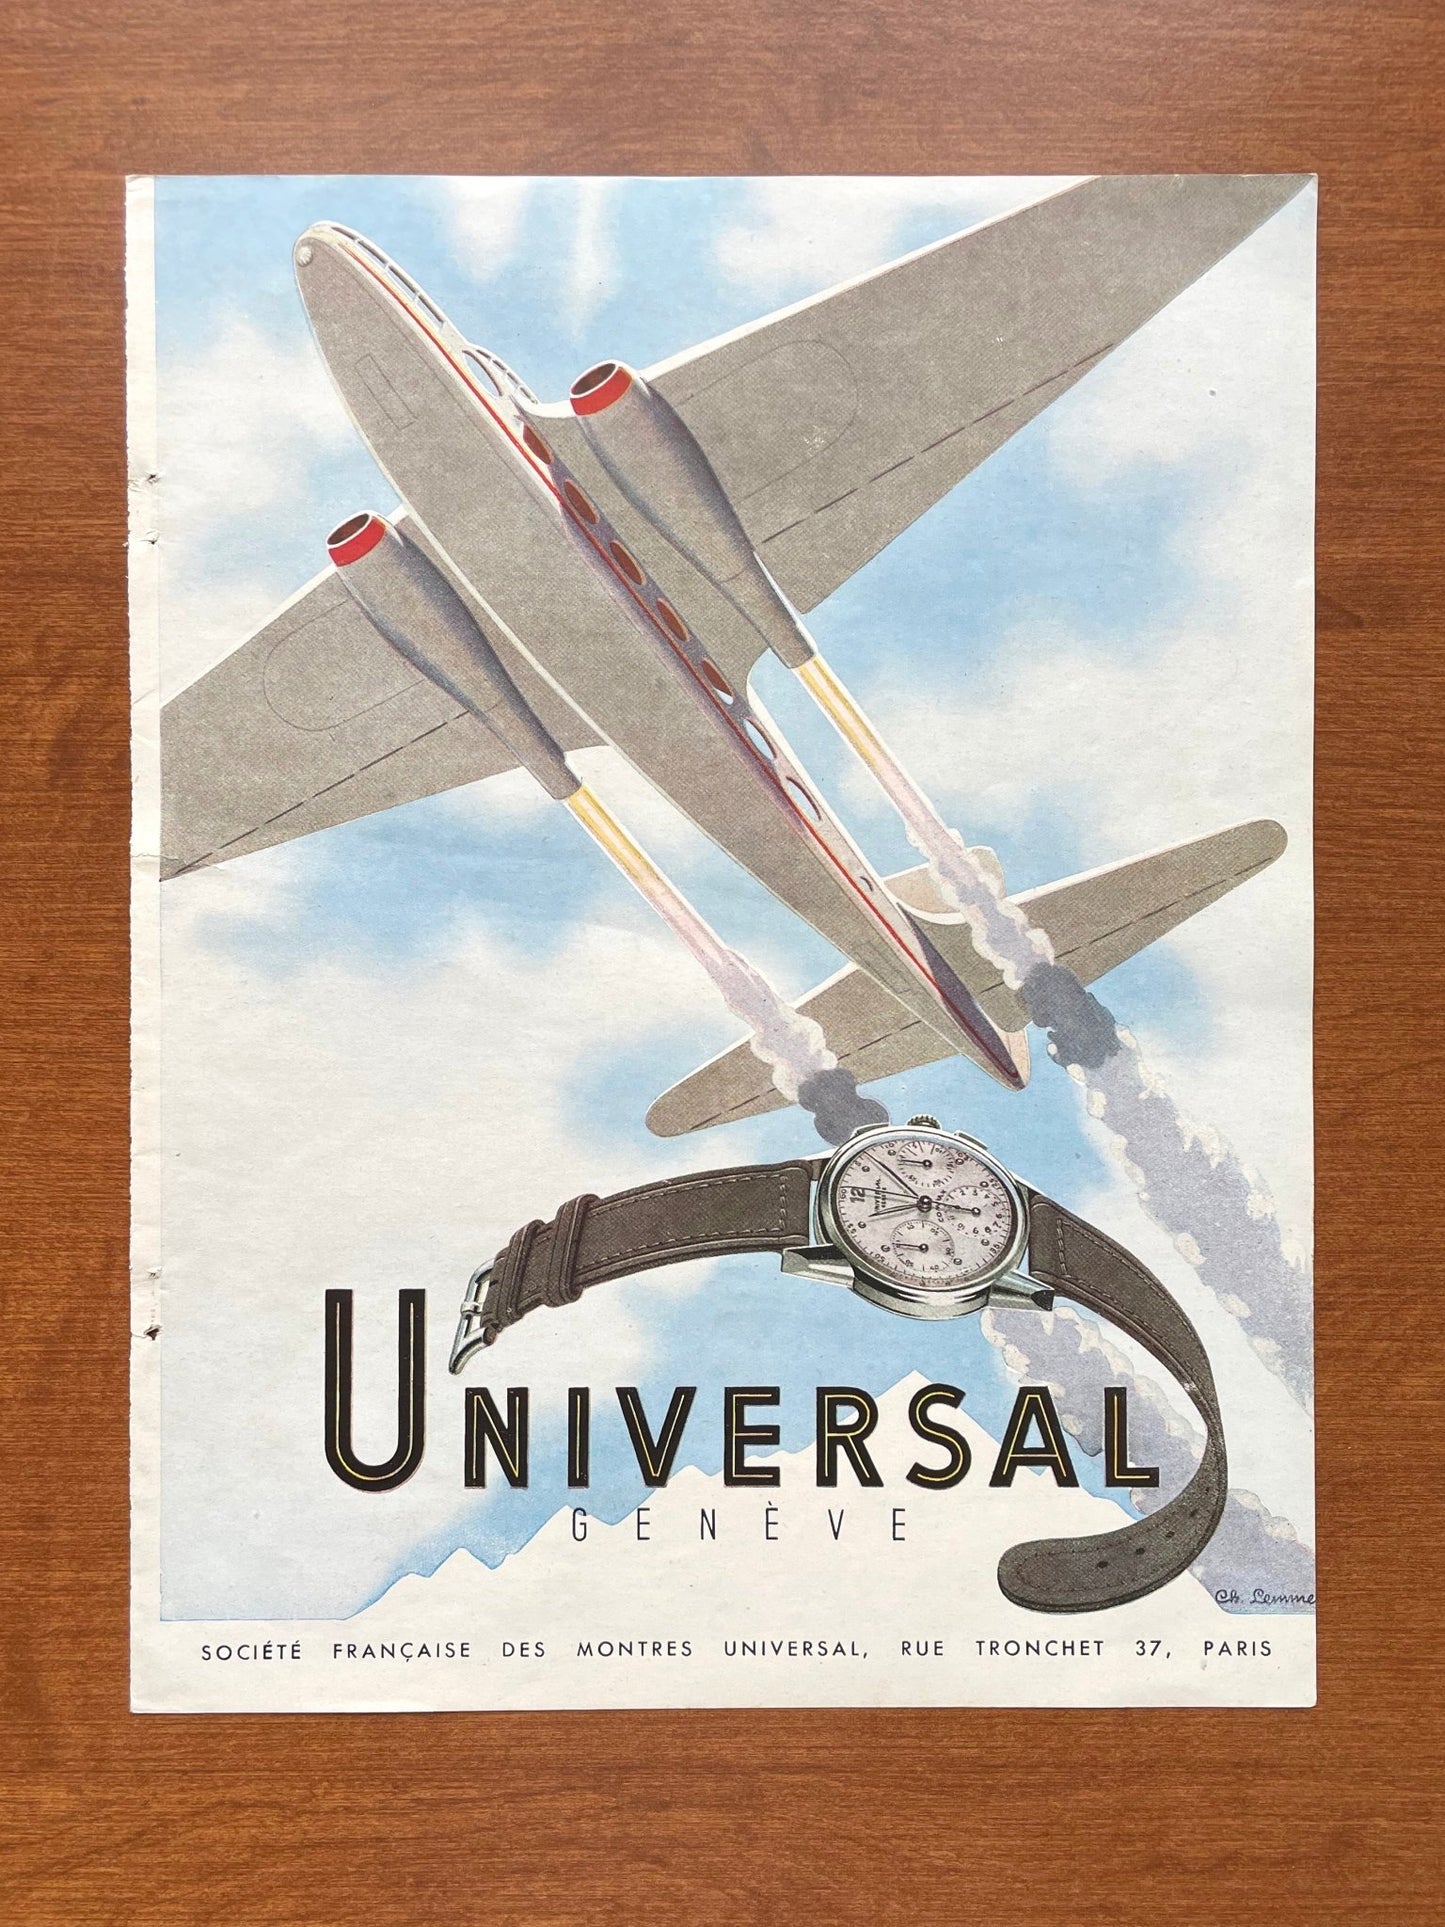 1948 Universal Geneve Compax with Airplane Advertisement